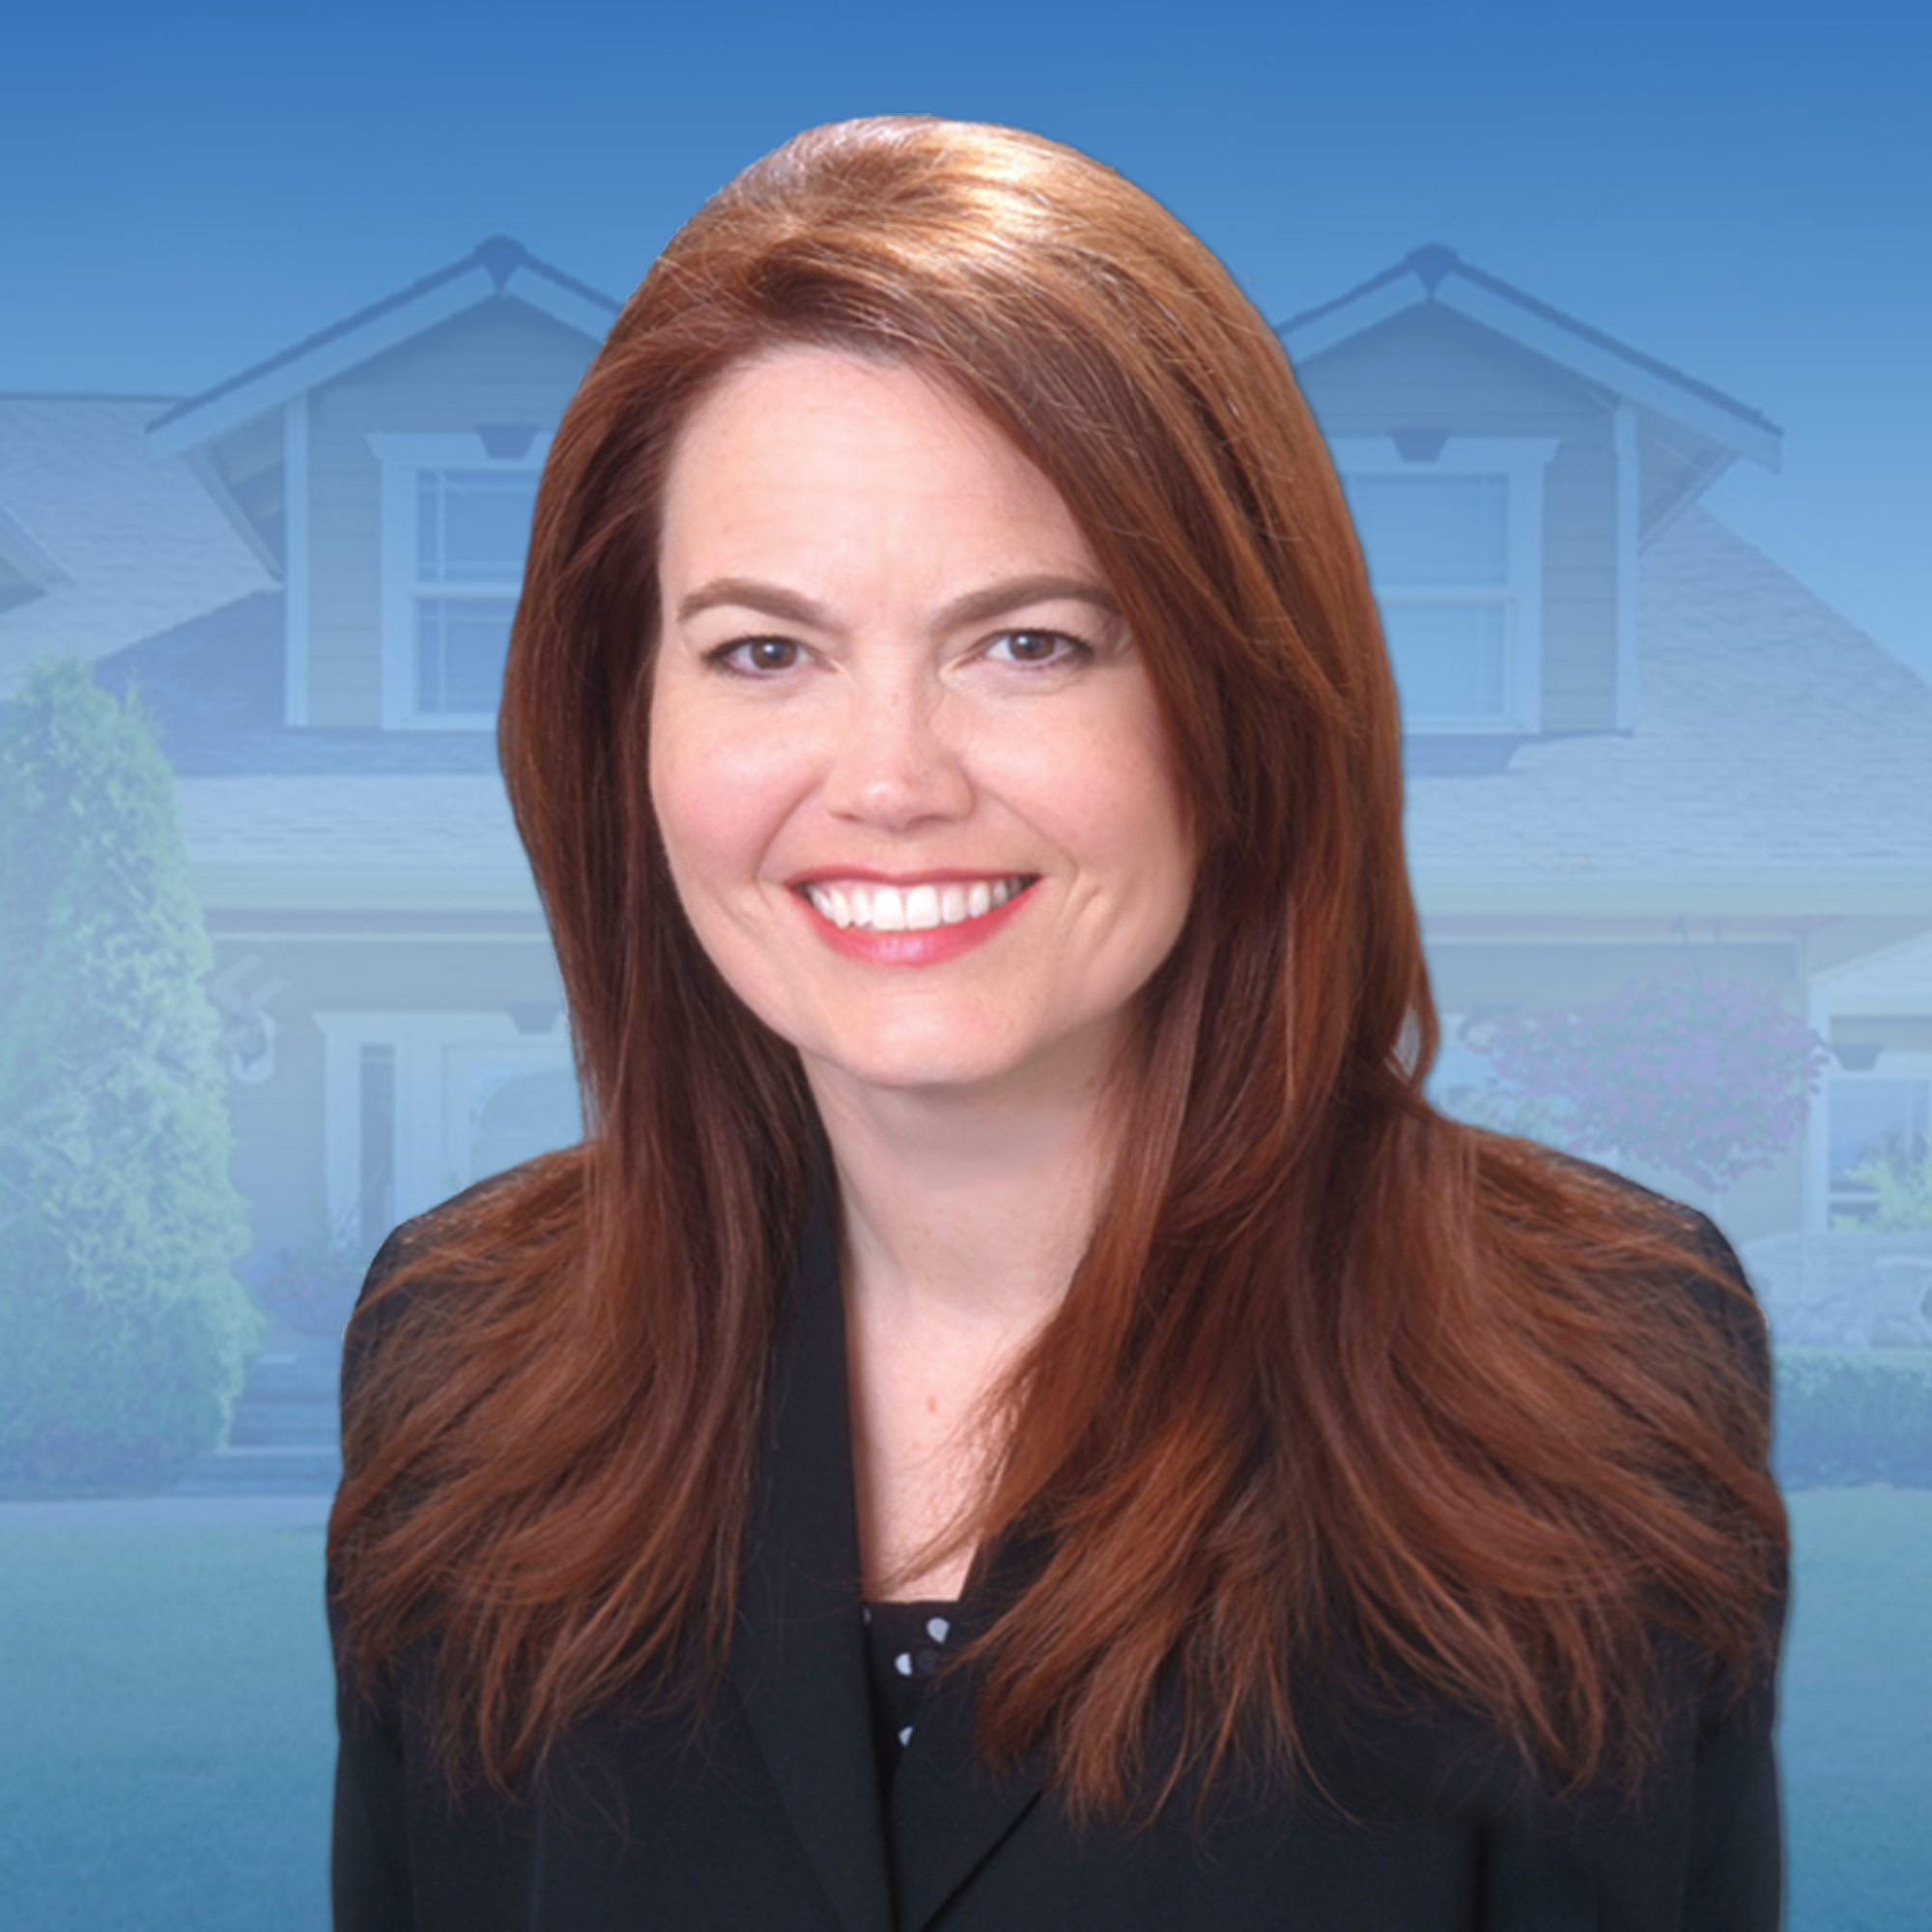 Pam Lee 24 Hour Real Estate